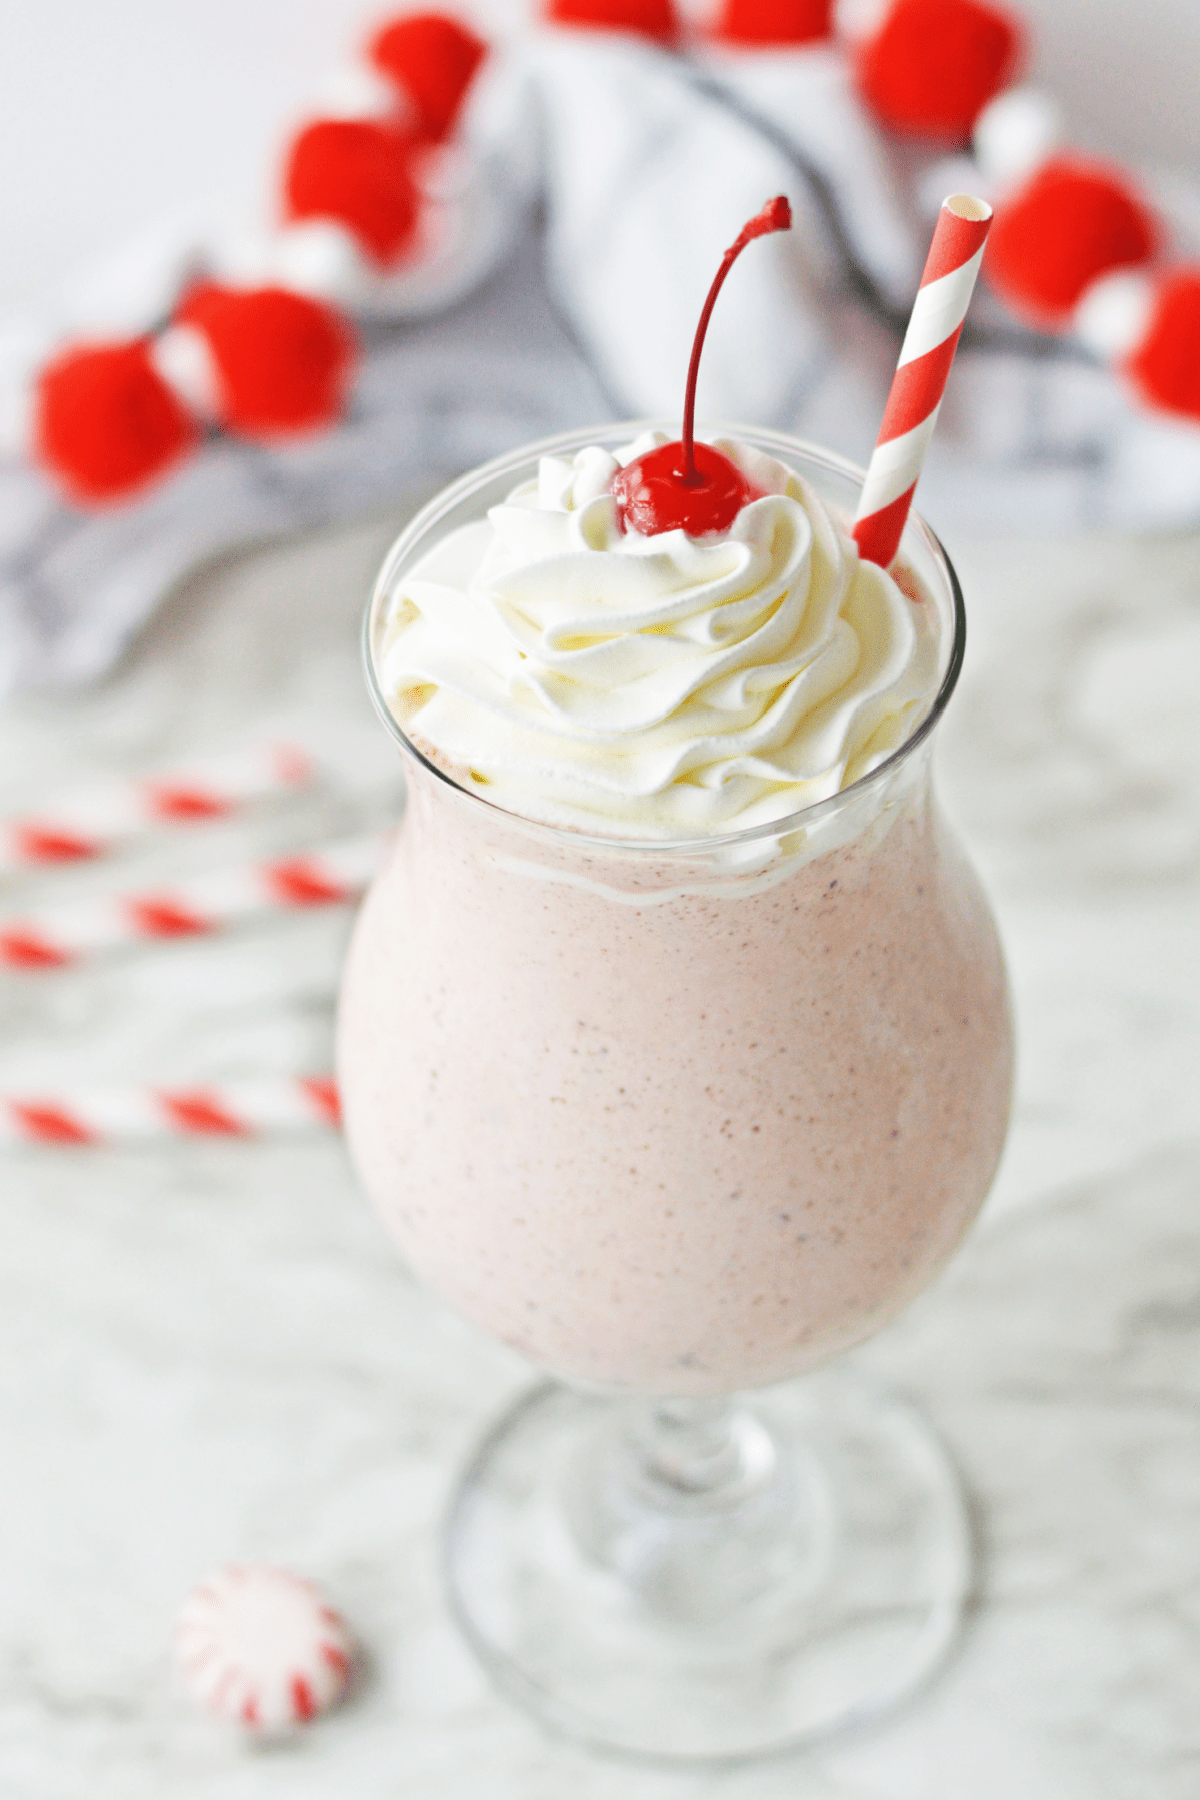 Copycat Chick Fil A Peppermint Milkshake with whipped cream and a cherry